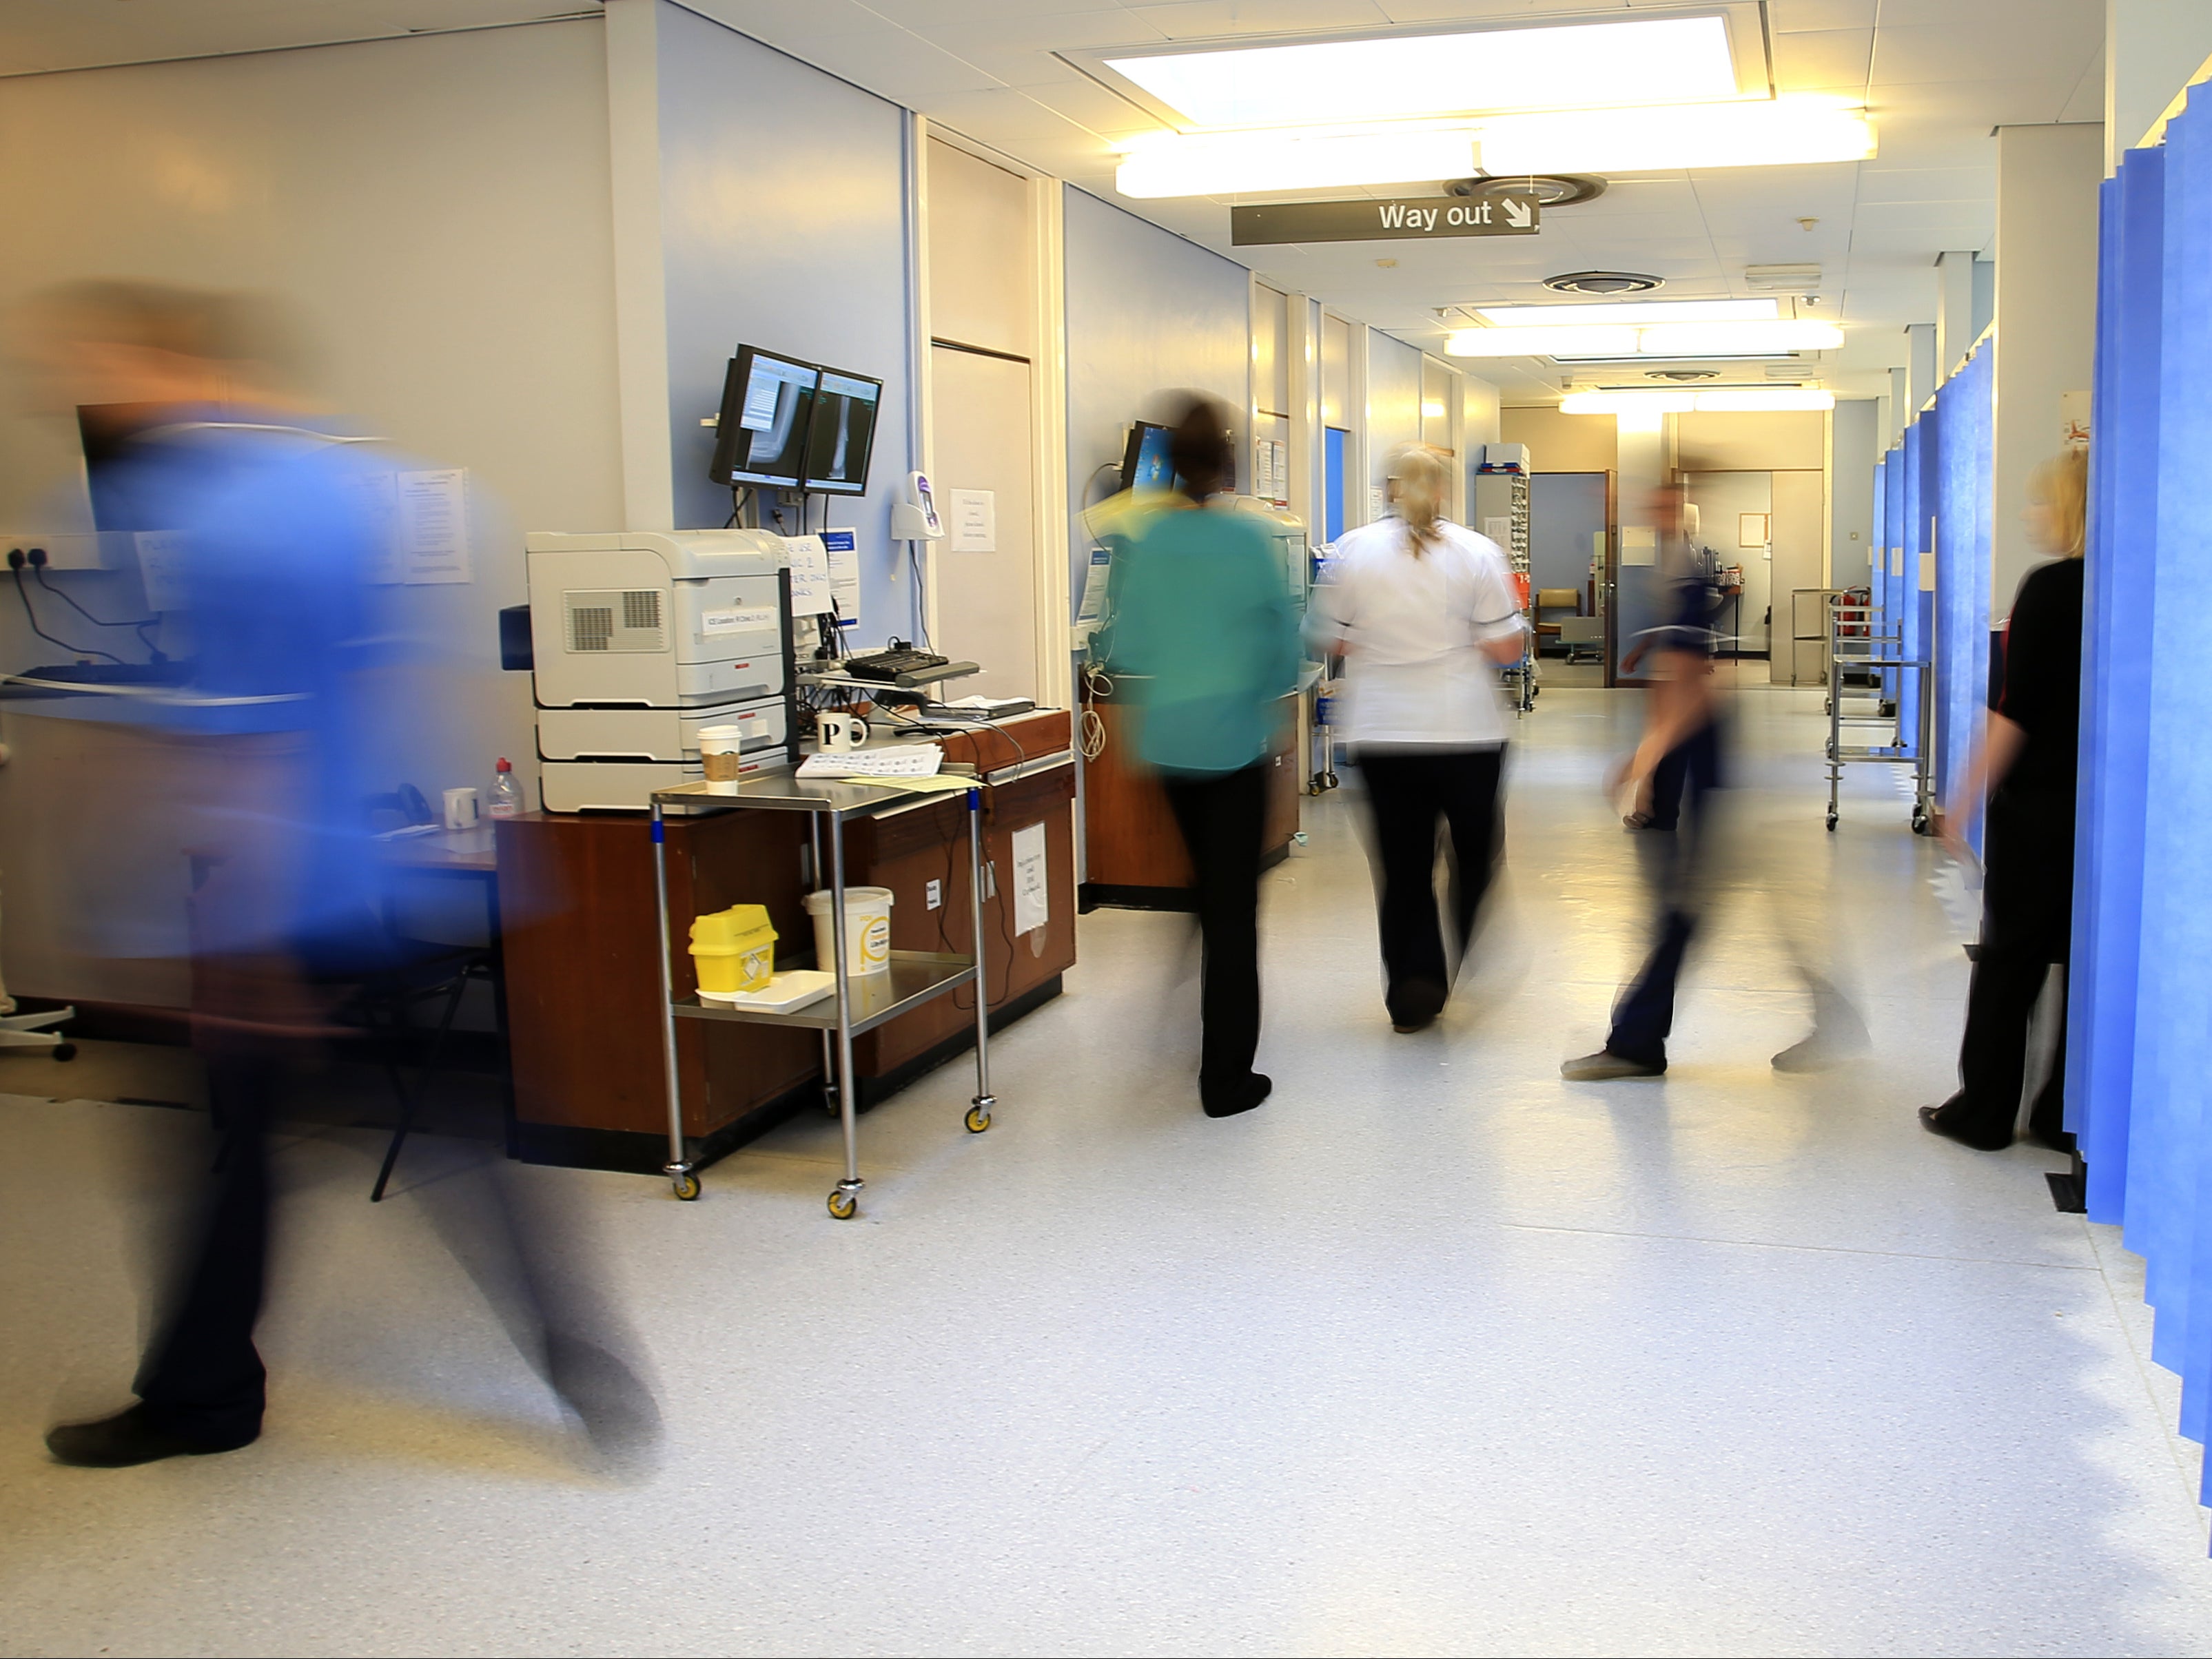 The health secretary will have the power to intervene in reconfigurations of NHS services